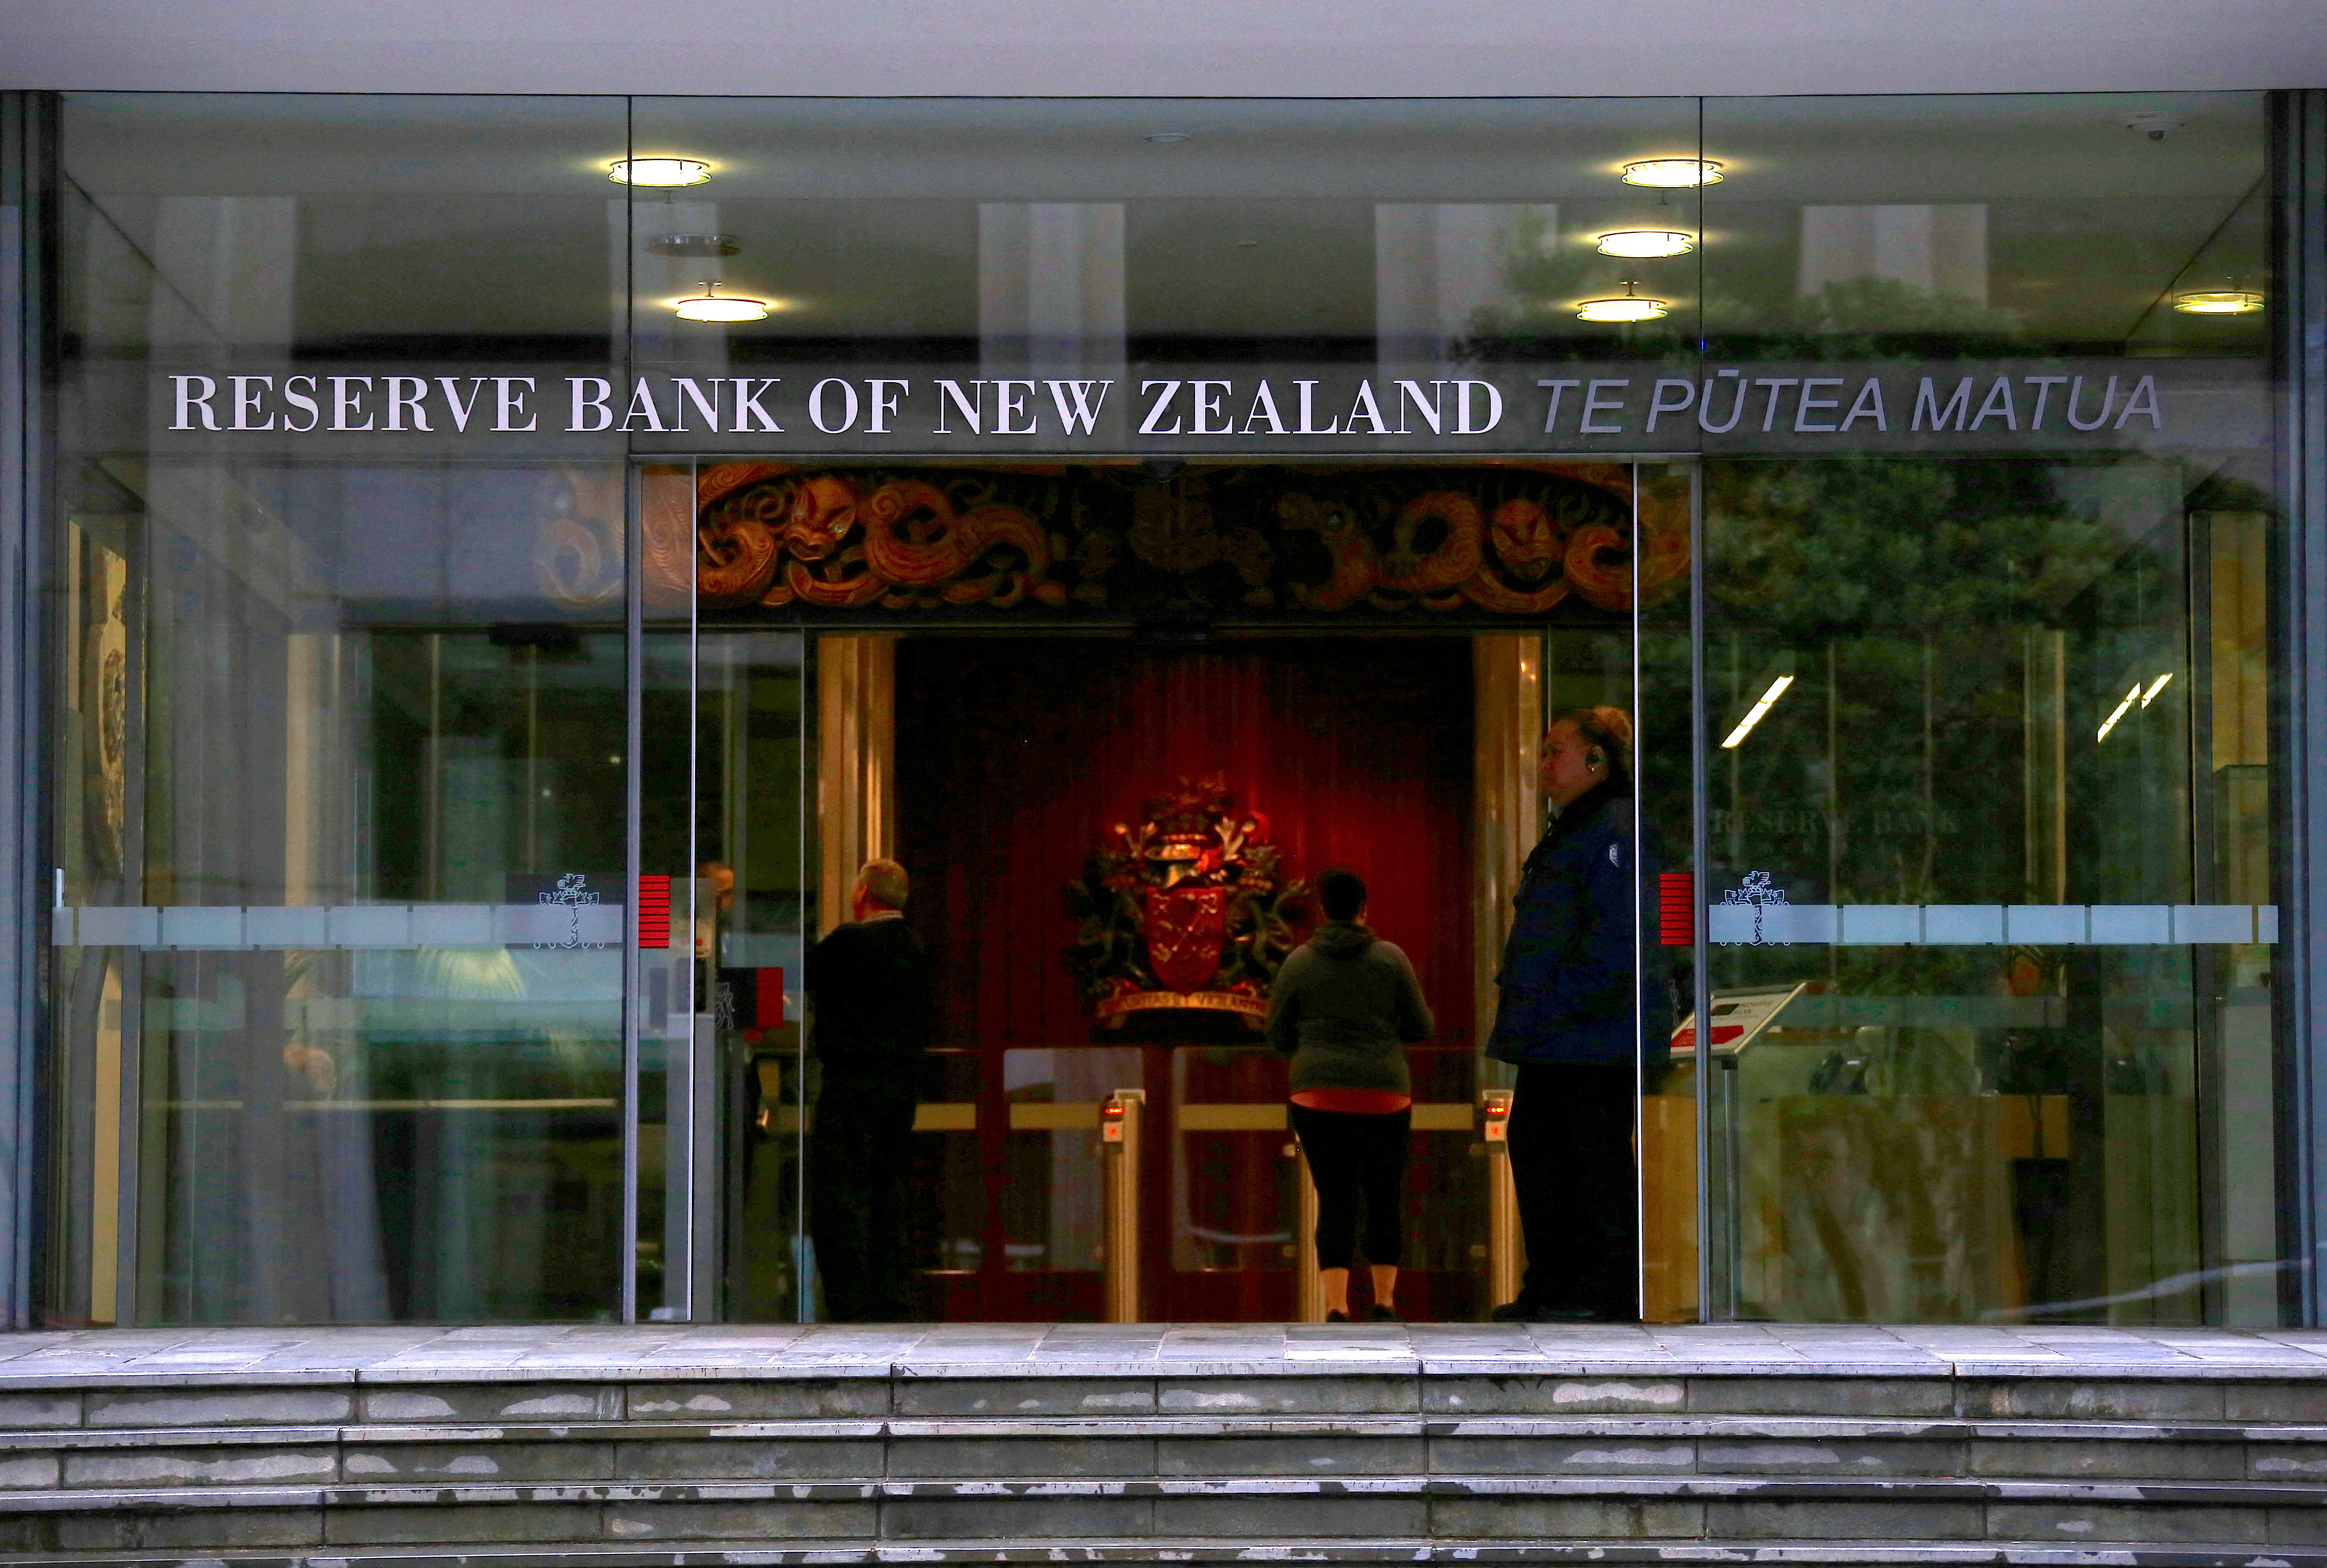 A security guard stands in the main entrance to the Reserve Bank of New Zealand located in central Wellington, New Zealand